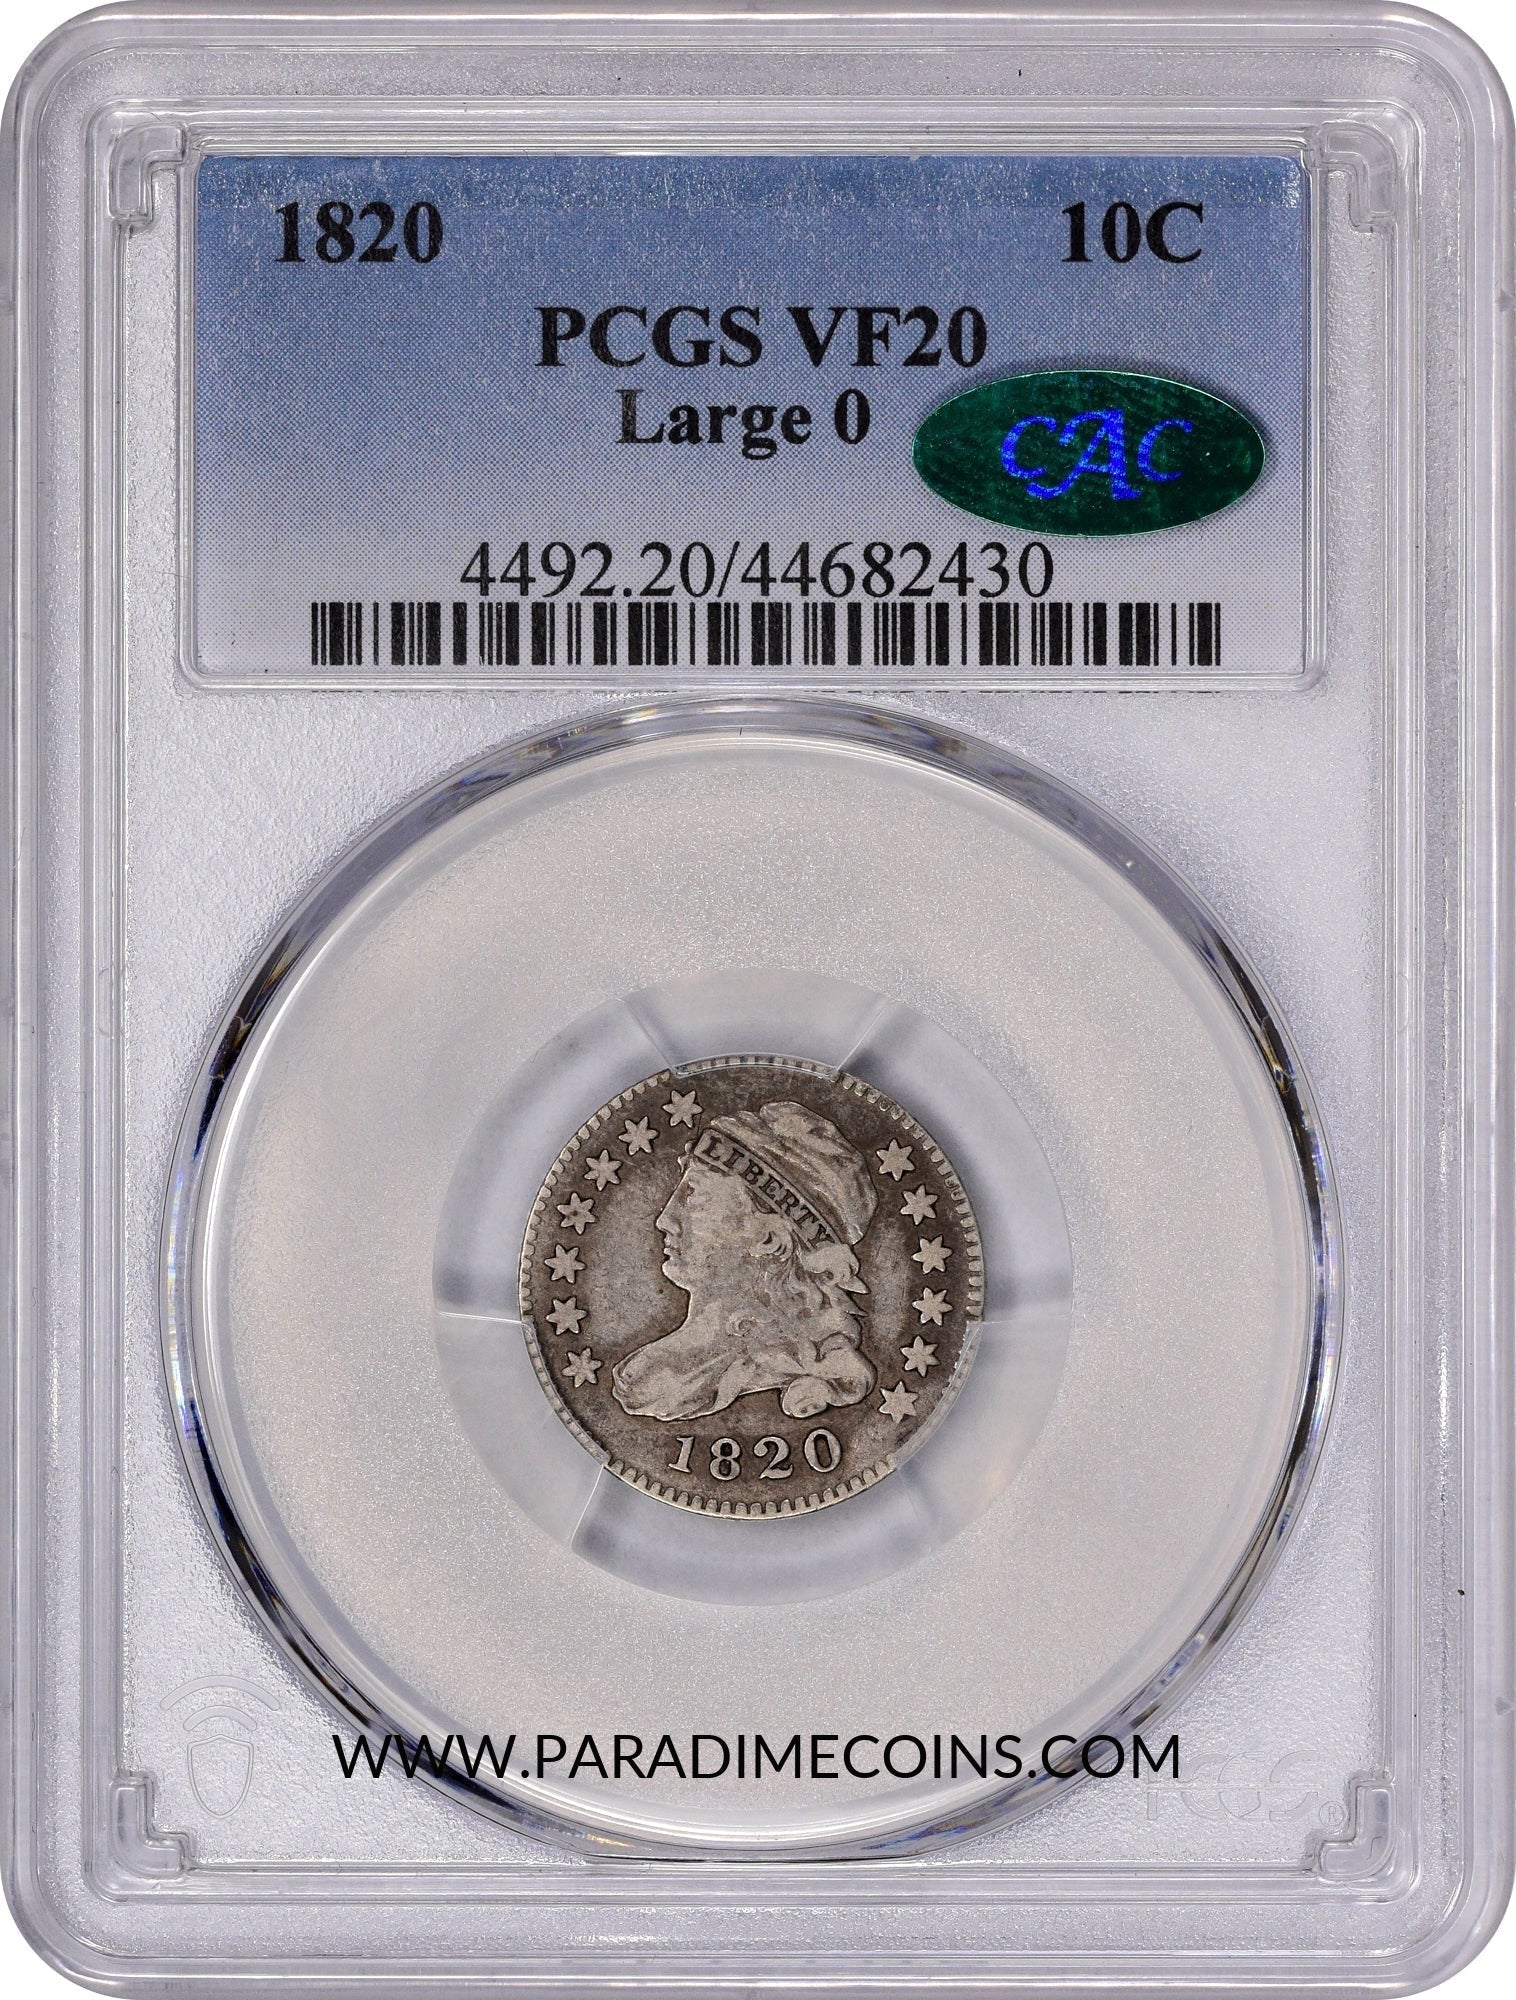 1820 10C LARGE 0 VF20 PCGS CAC - Paradime Coins | PCGS NGC CACG CAC Rare US Numismatic Coins For Sale